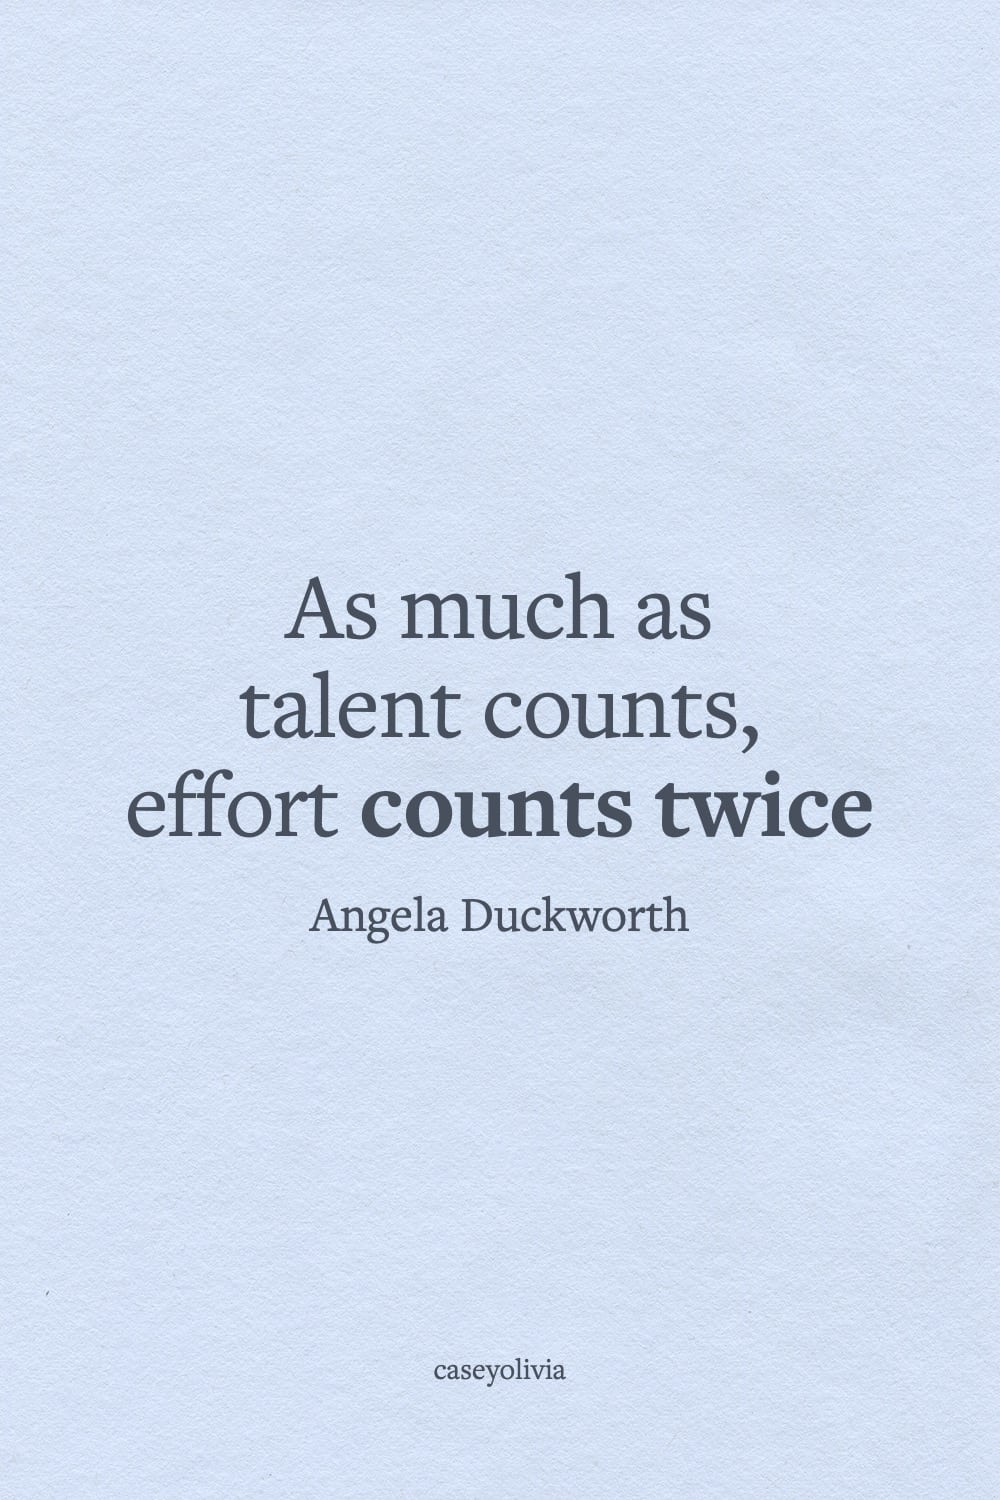 effort counts twice short quote for motivation